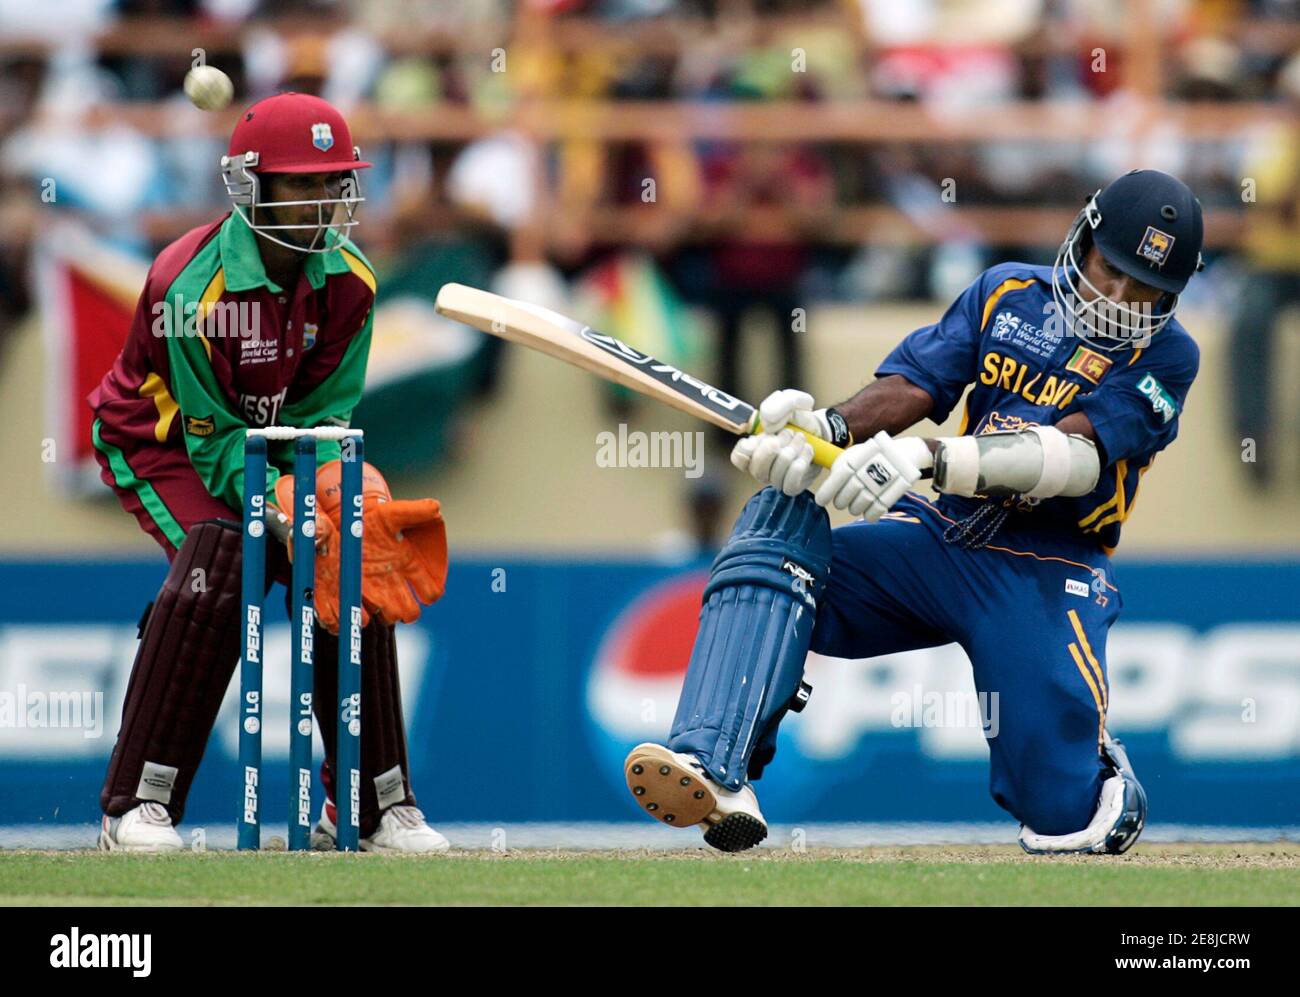 Sri Lanka's captain Mahela Jayawardene plays a shot as West Indies wicketkeeper Denesh Ramdin watches during their World Cup cricket Super Eights match in Georgetown April 1, 2007.   MOBILES OUT, EDITORIAL USE ONLY   REUTERS/Andy Clark   (GUYANA) Stock Photo